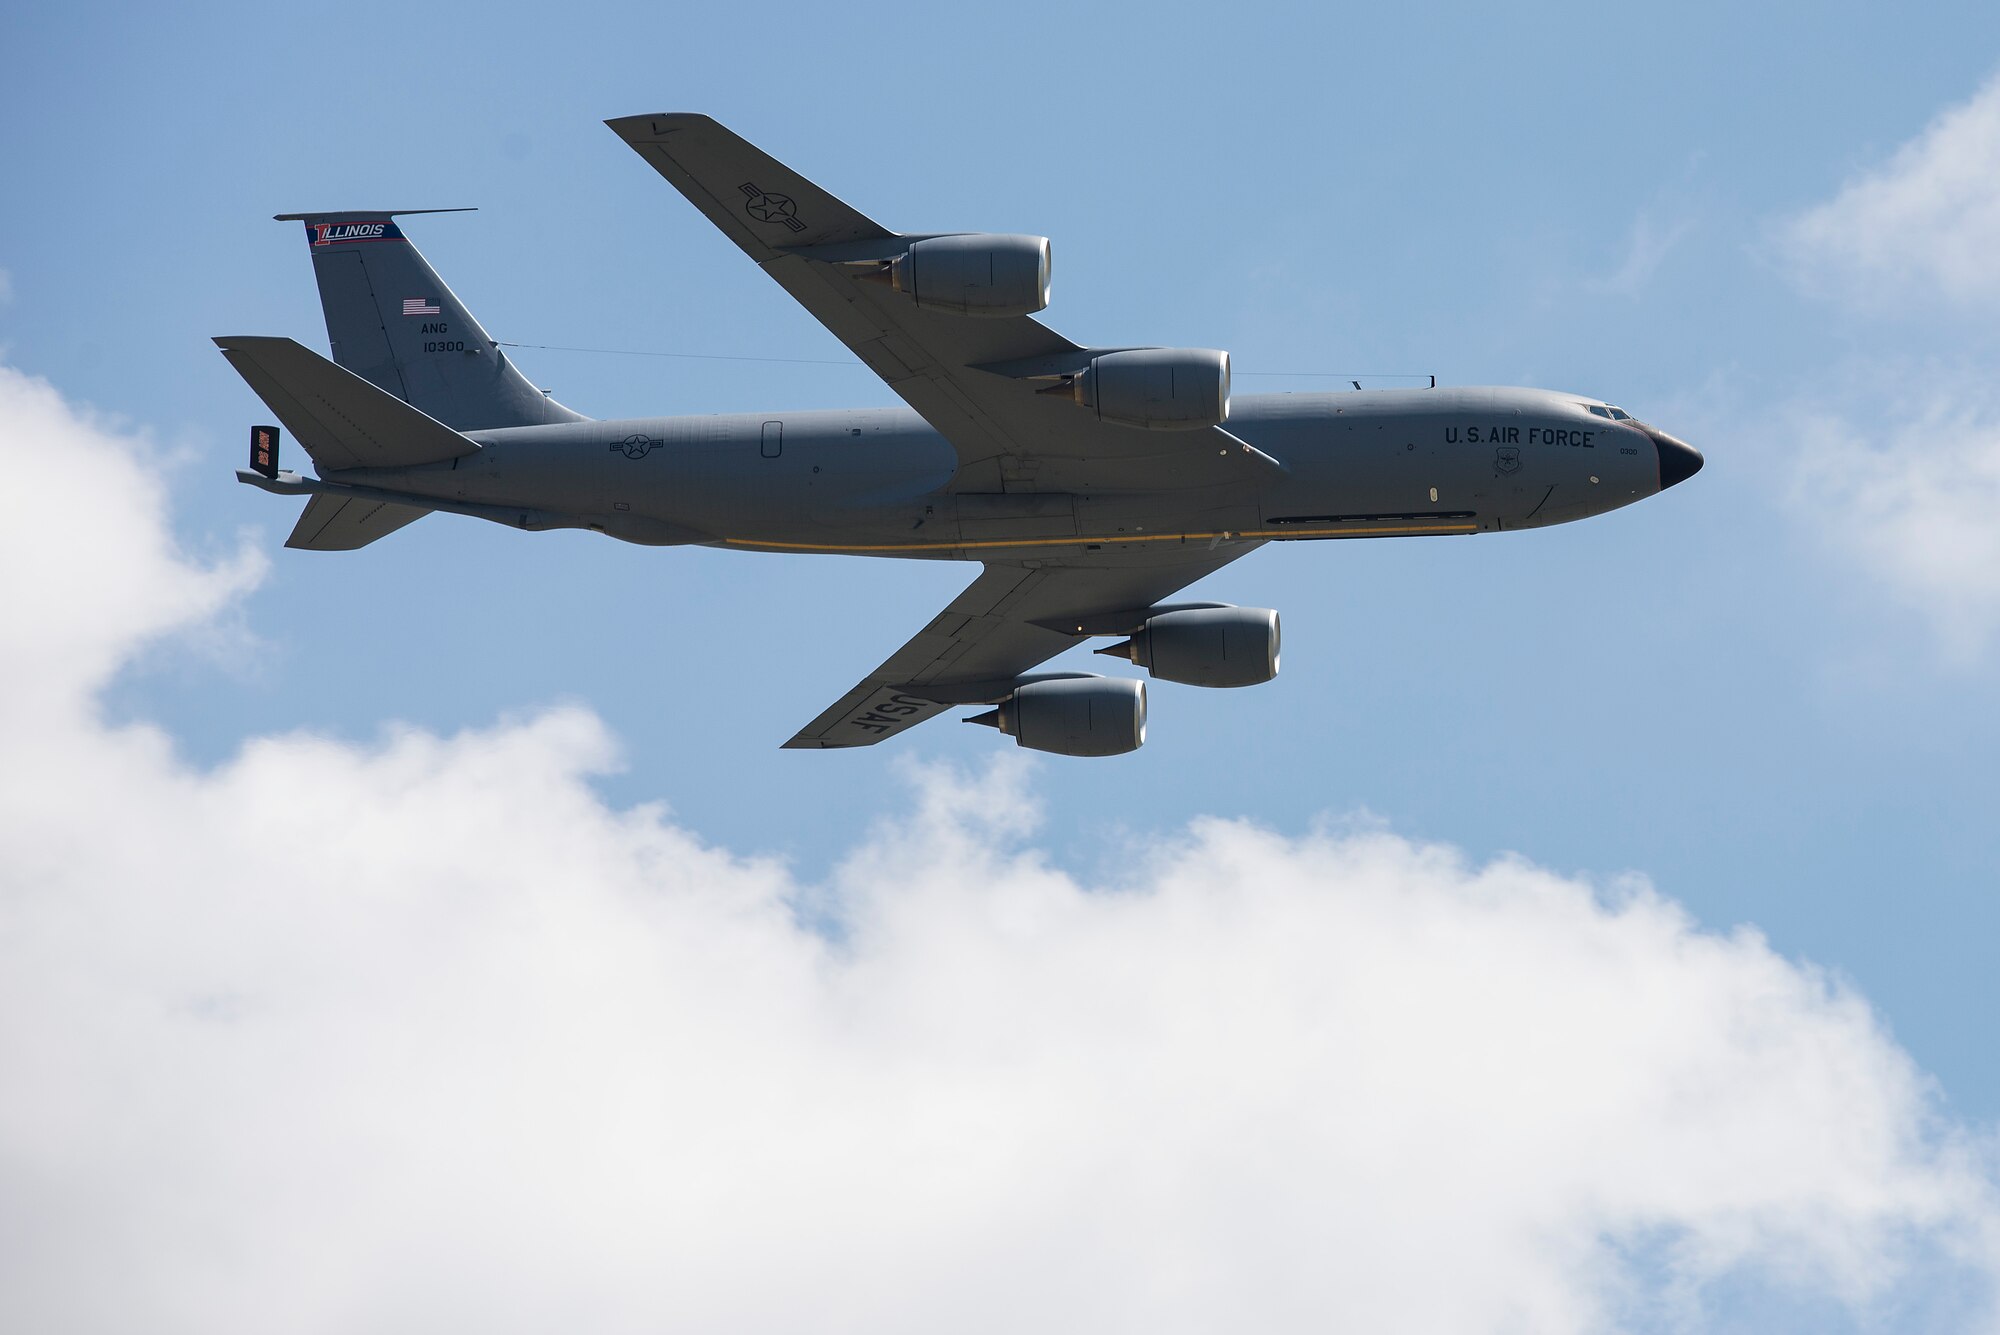 The KC-135 conducts a fly by during the 100th Centennial Celebration Air Show, June 10, 2017, at Scott Air Force Base, Ill. Through the years, the KC-135 has been altered to do other jobs ranging from flying command post missions to reconnaissance. Of the original KC-135As, more than 415 have been modified with new CFM-56 engines produced by CFM-International. The re-engined tanker, designated either the KC-135R or KC-135T, can offload 50 percent more fuel, is 25 percent more fuel efficient, costs 25 percent less to operate and is 96 percent quieter than the KC-135A. (U.S. Air Force photo by Tech. Sgt. Jonathan Fowler)